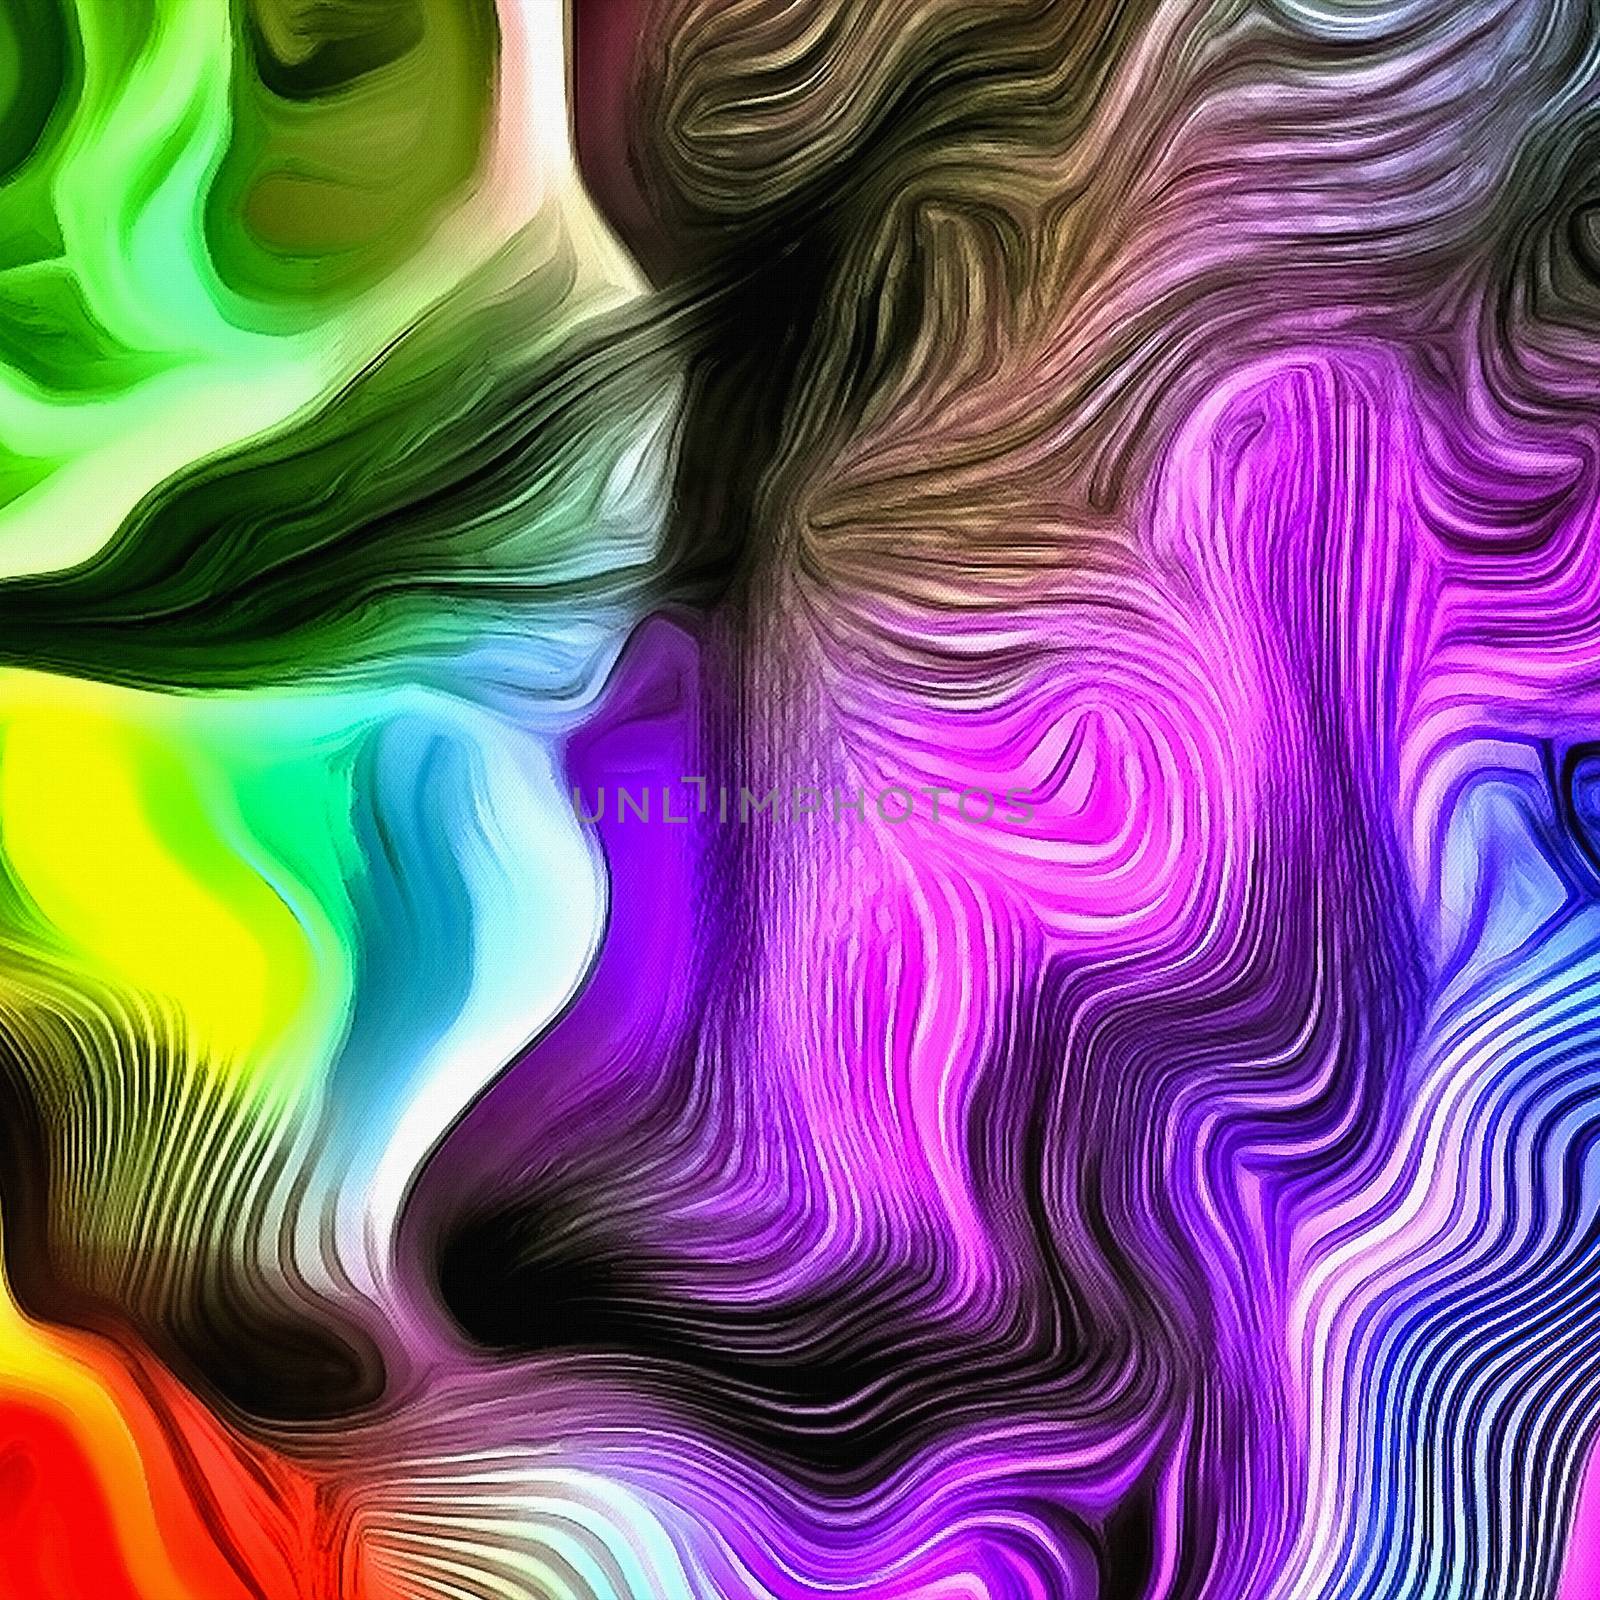 Abstract of colors and lines. Purple is main color. 3D rendering